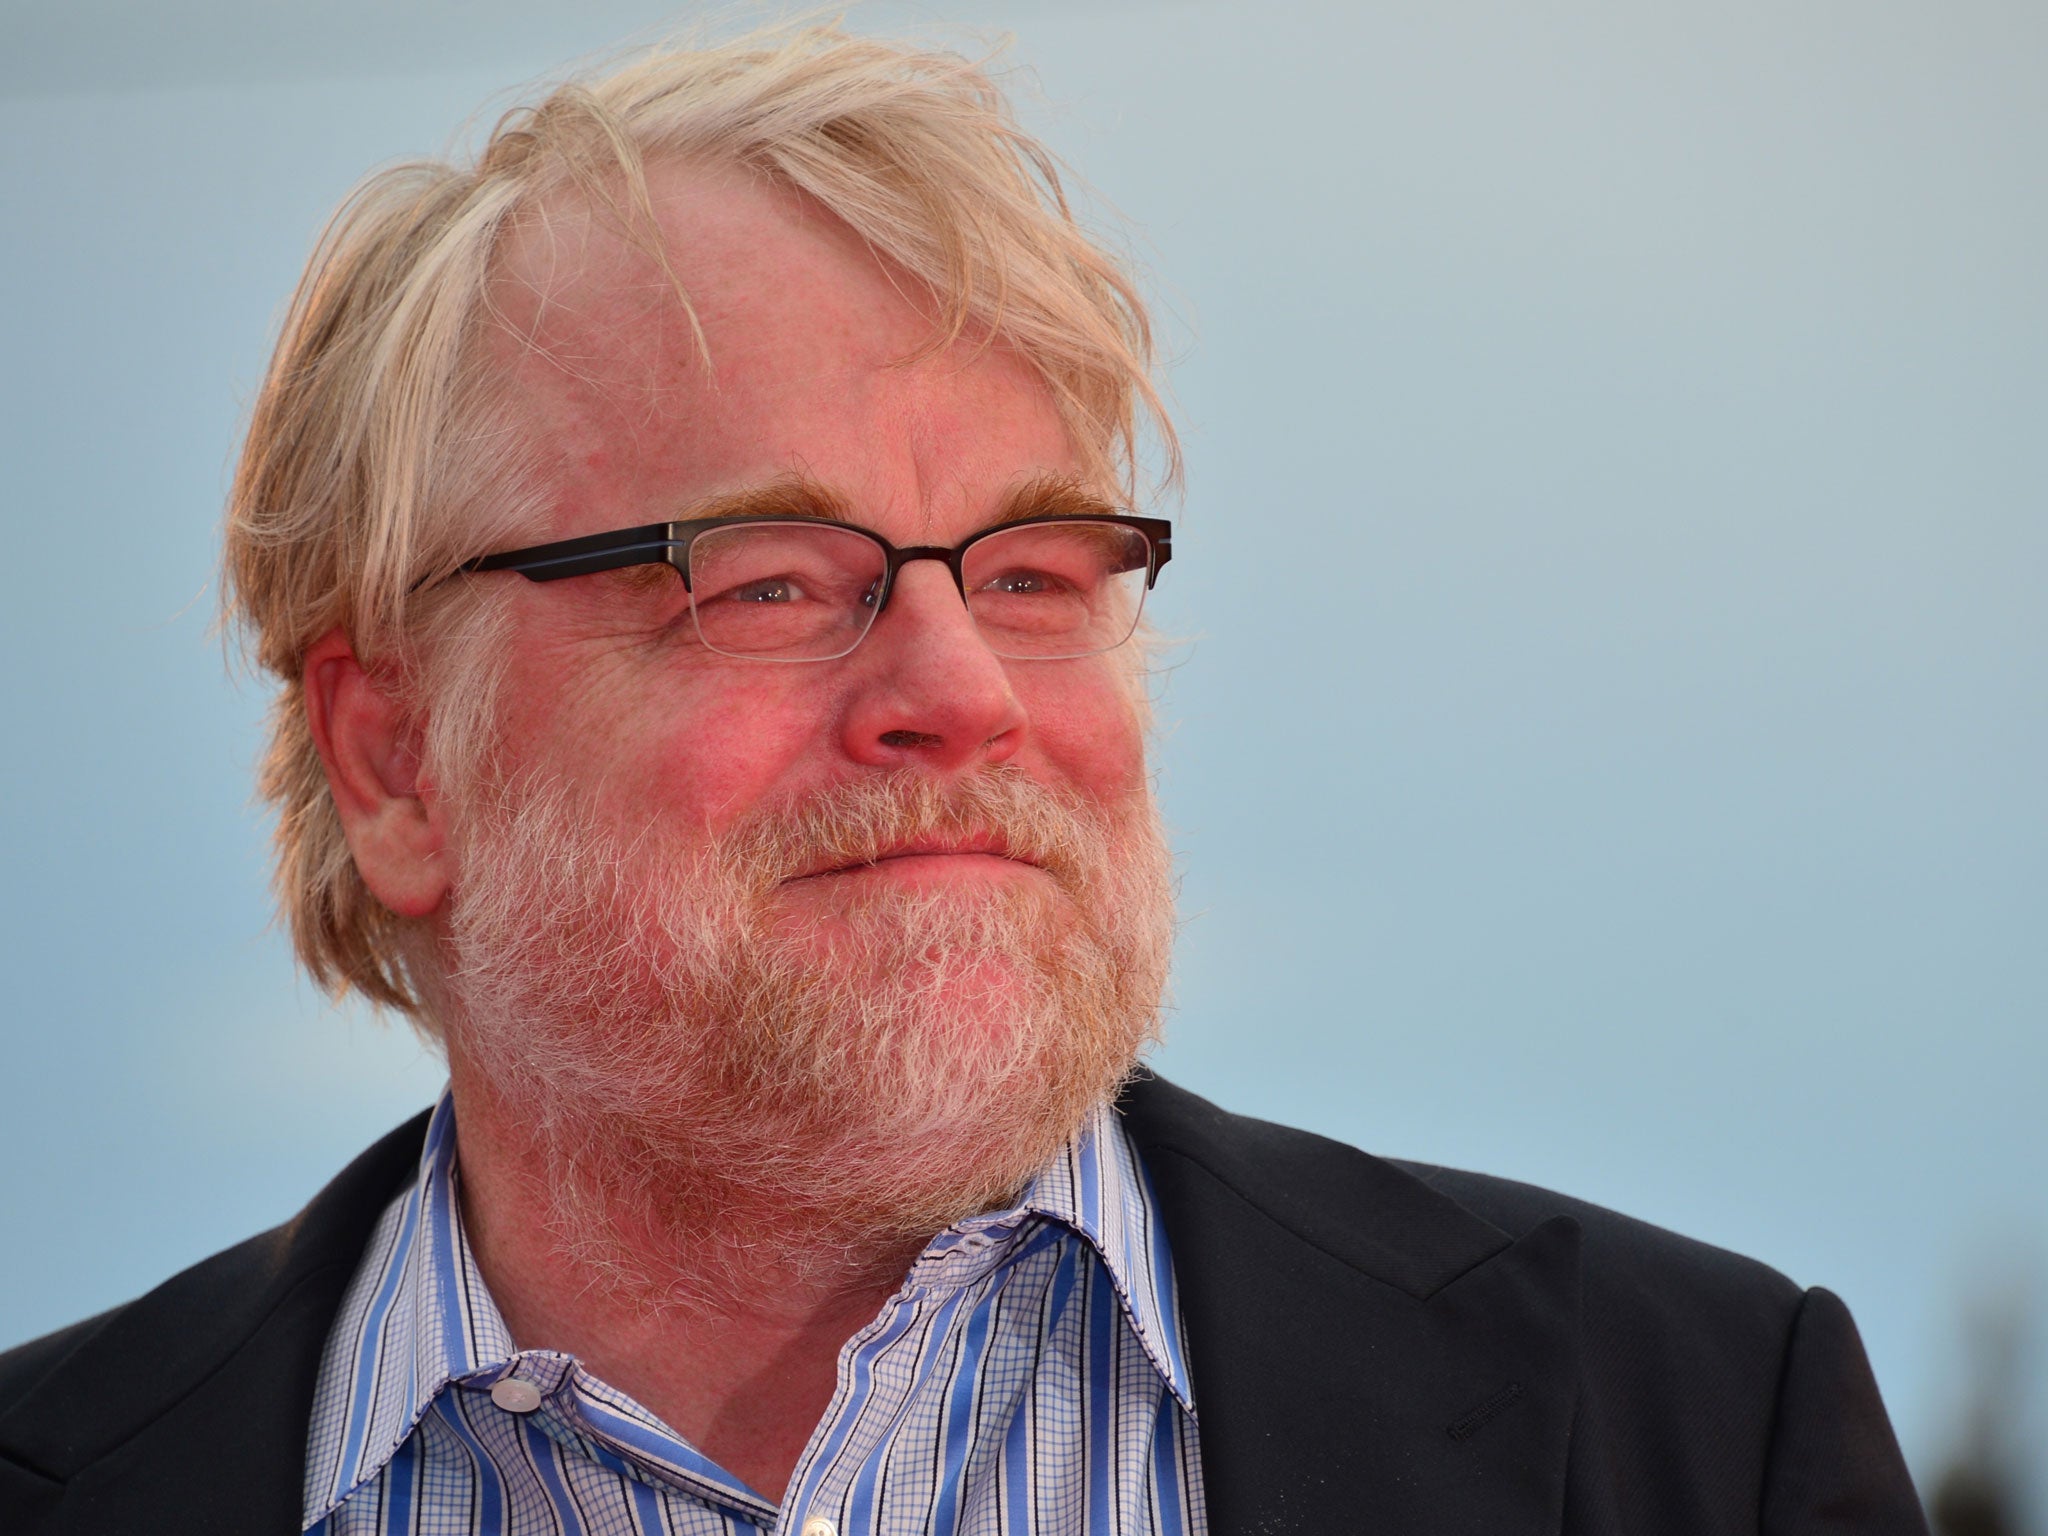 Philip Seymour Hoffman was due to star in a new comedy series called Happyish, the future of which now looks uncertain (Picture: Getty)